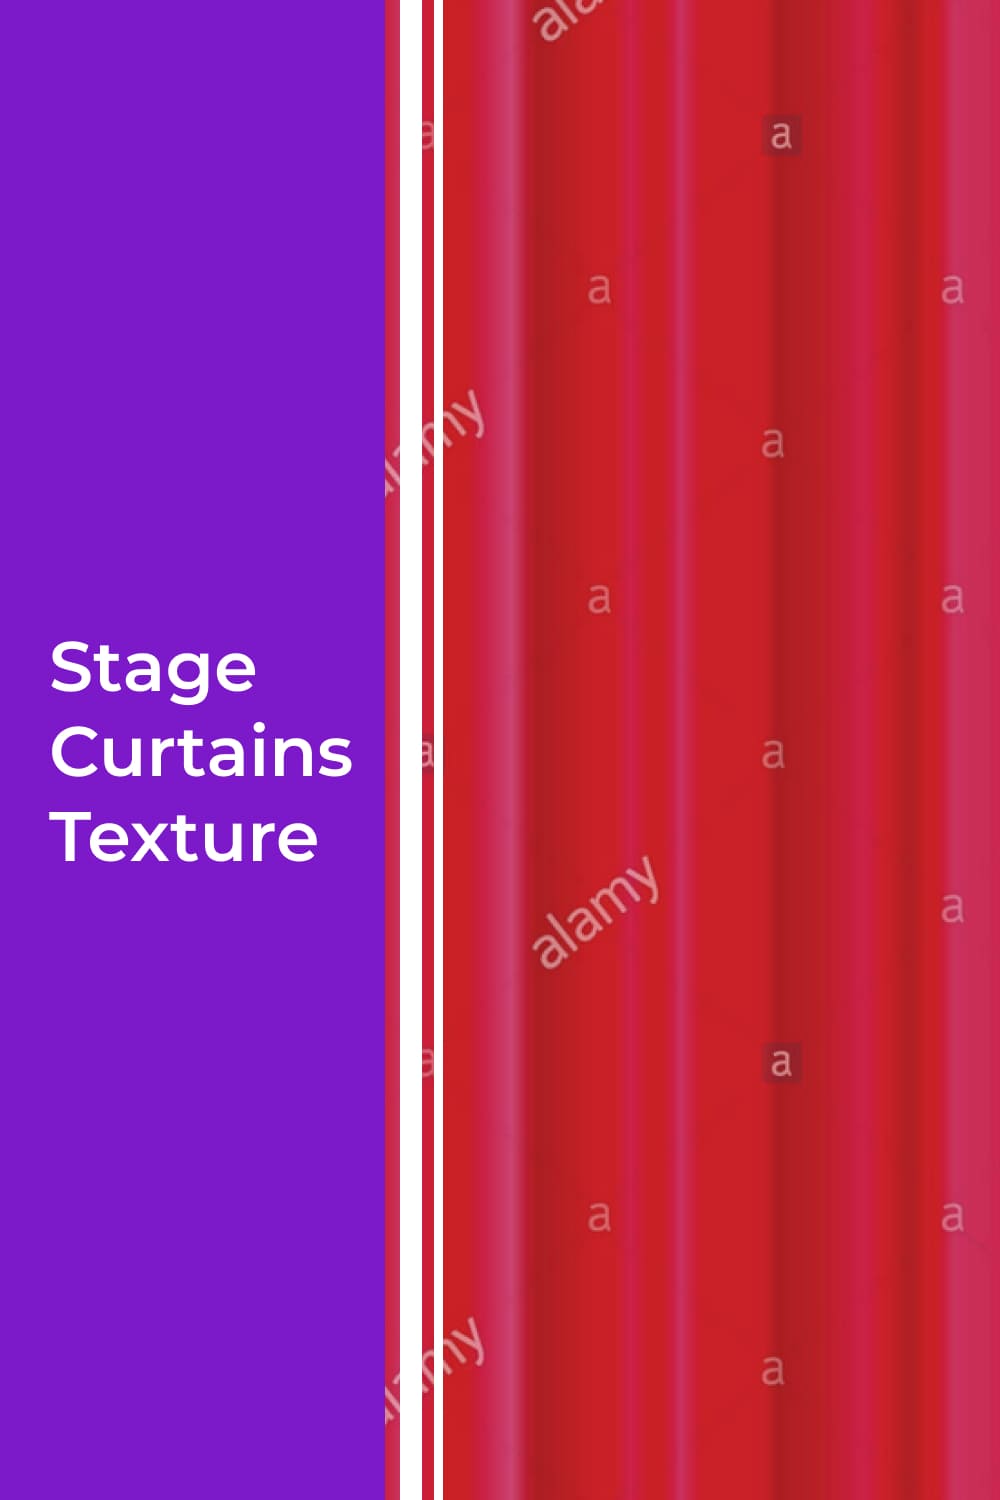 Stage red curtains texture.